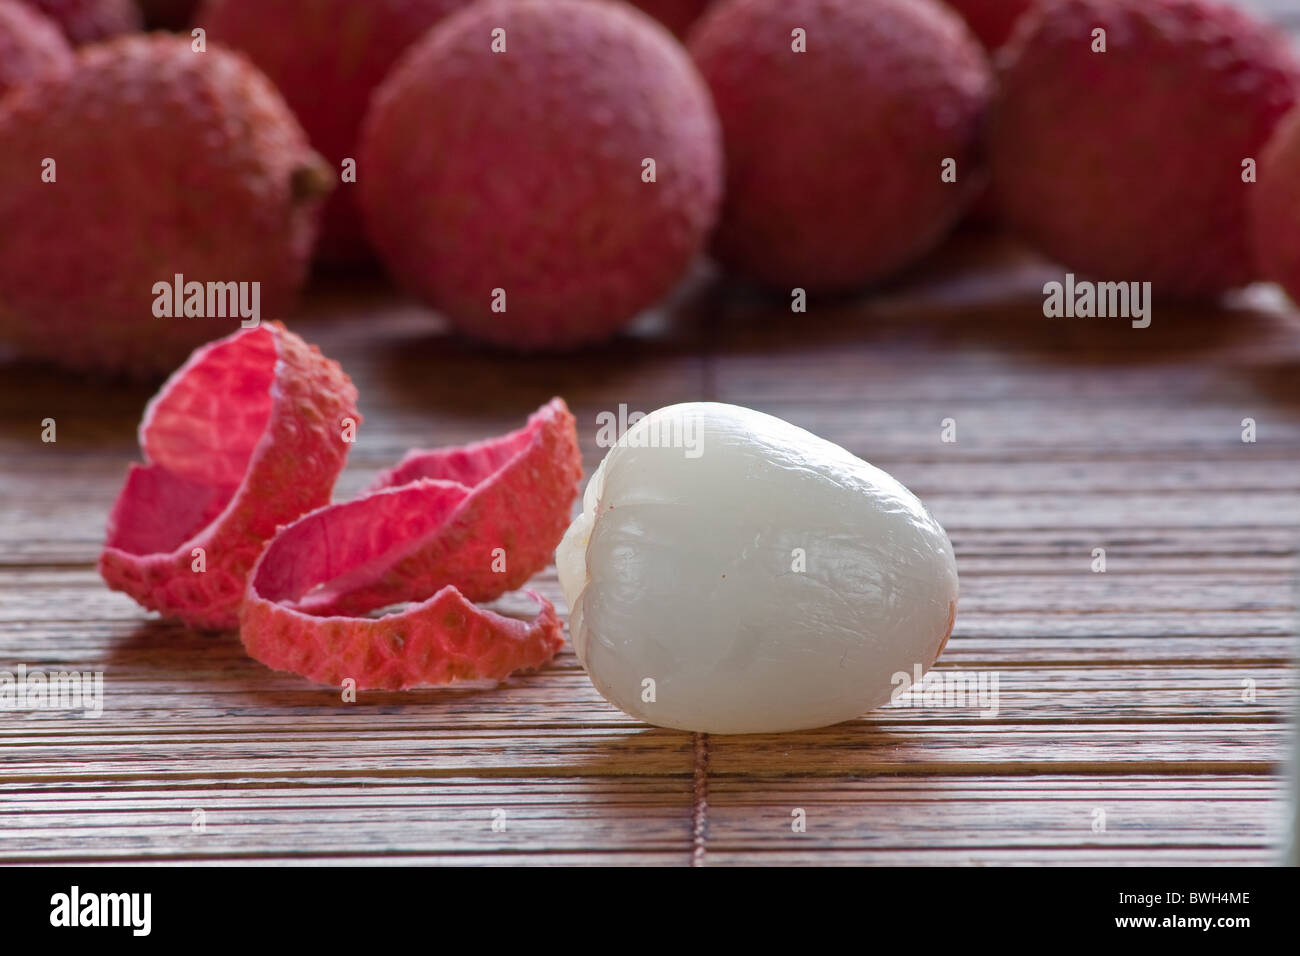 Whole and peeled lychee on bamboo mat Stock Photo